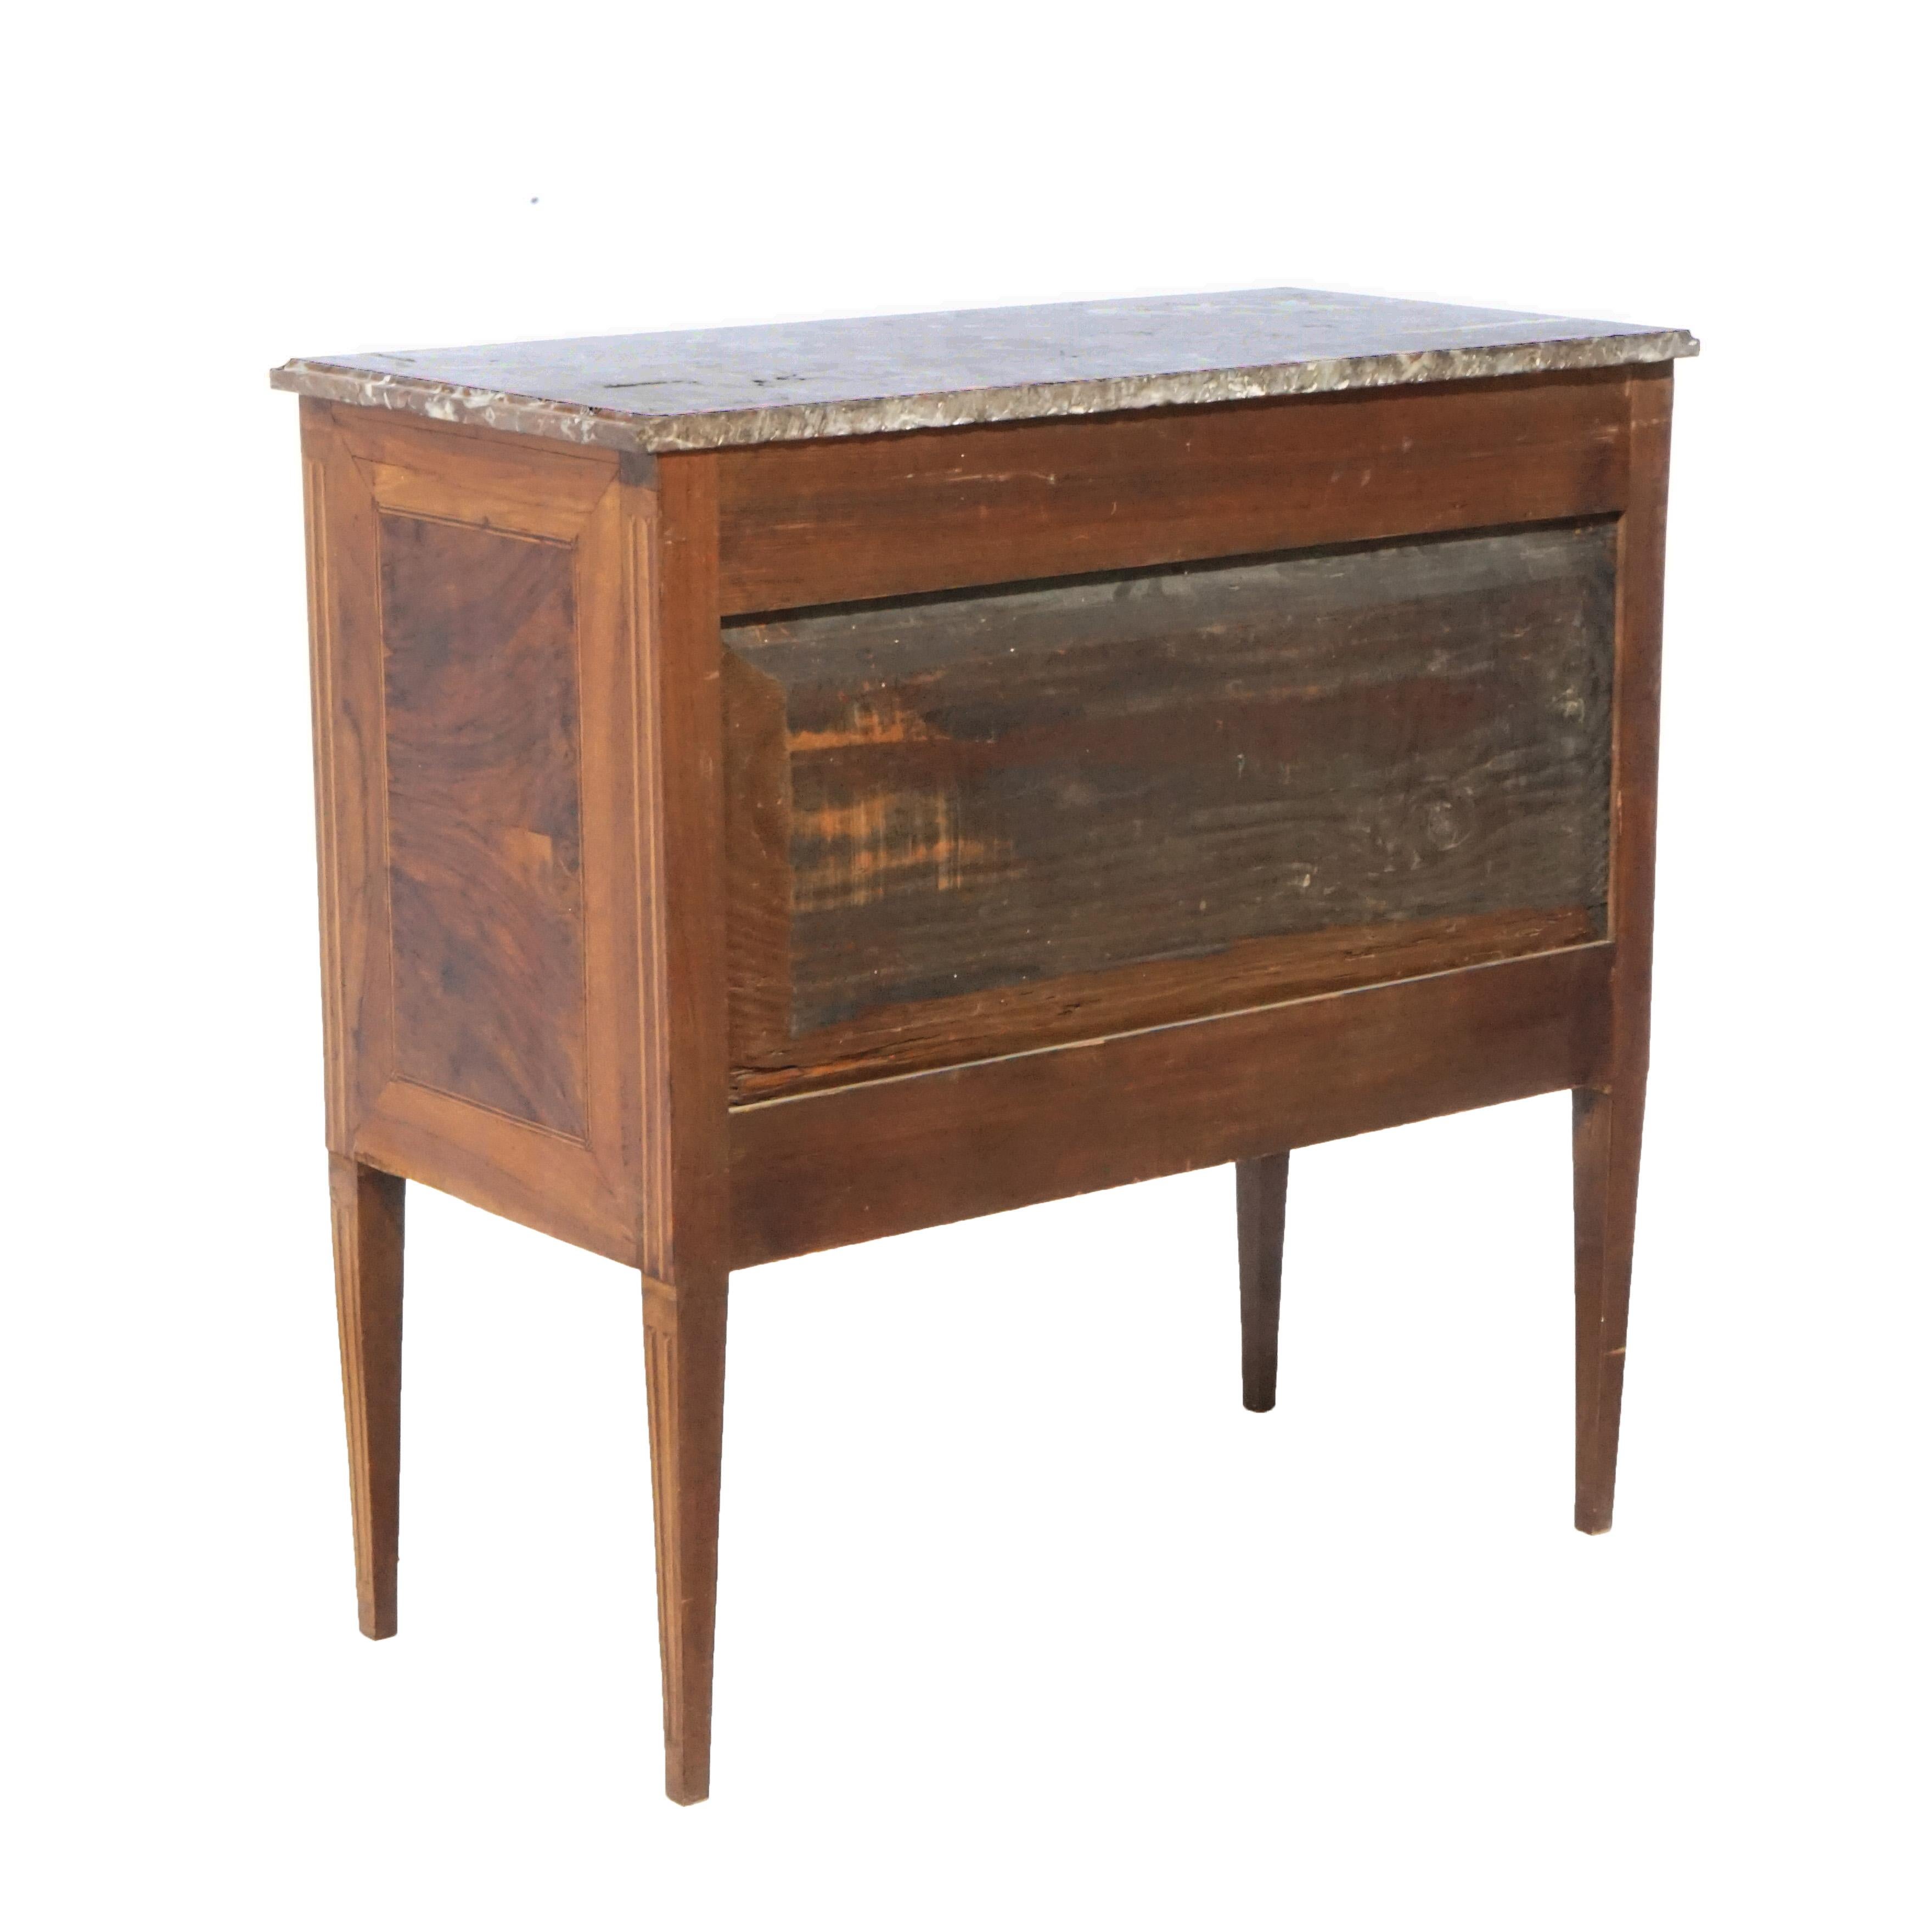 Inlay Early Antique Italian Specimen Marble, Kingwood & Satinwood Inlaid Commode 18thC